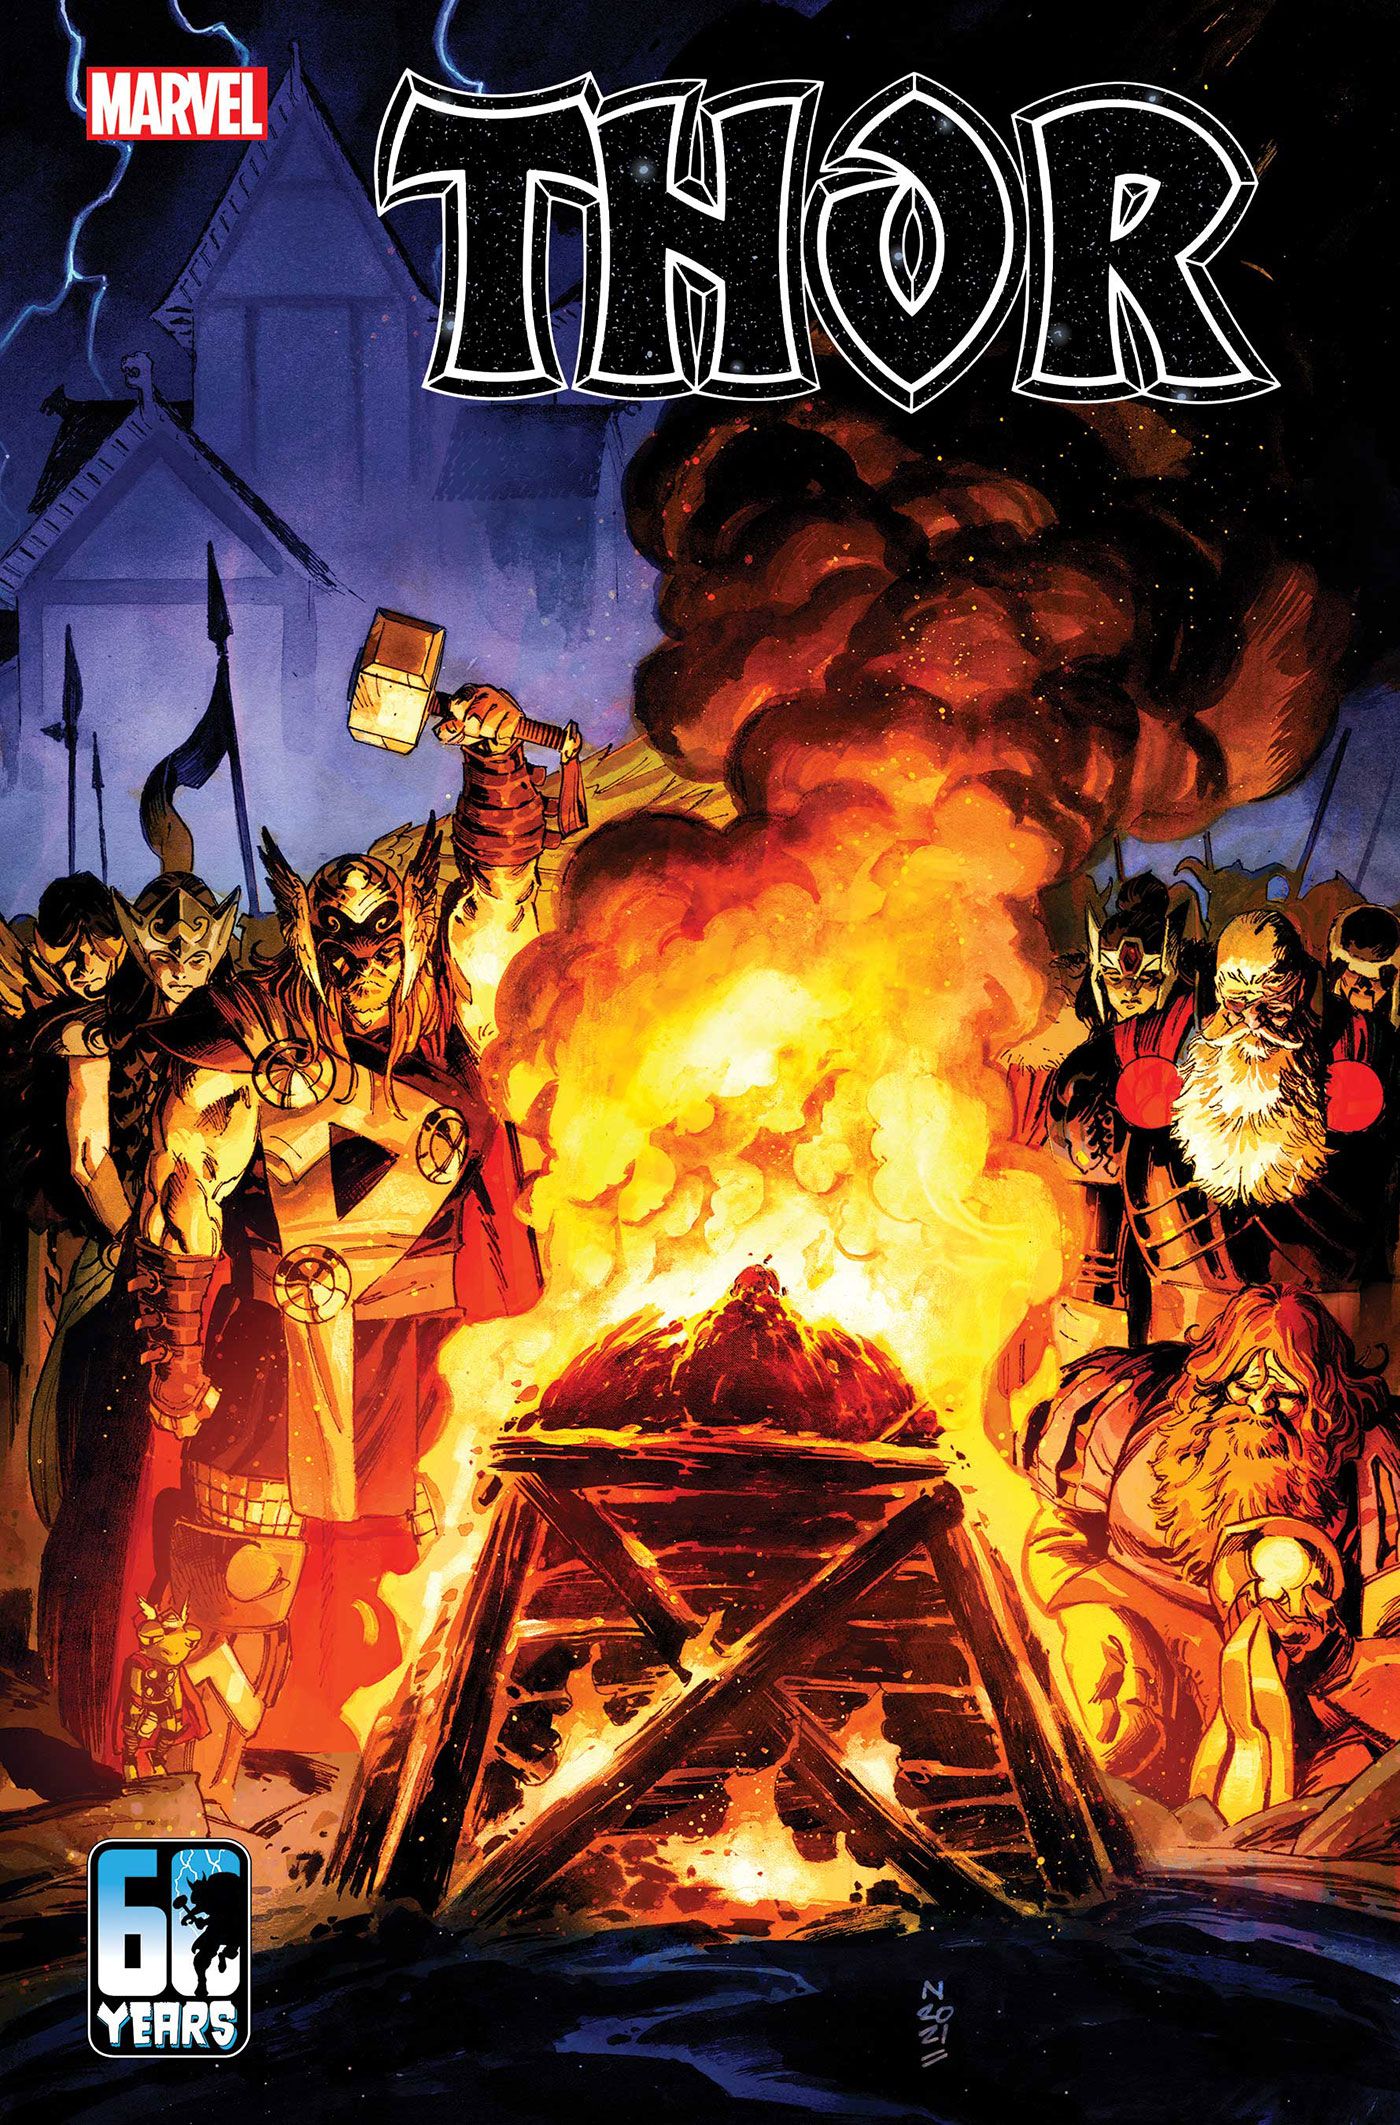 Odinson, Sif, Valkyrie and other heroes perform a Viking funeral on the cover to Thor 24 by Nic Klein